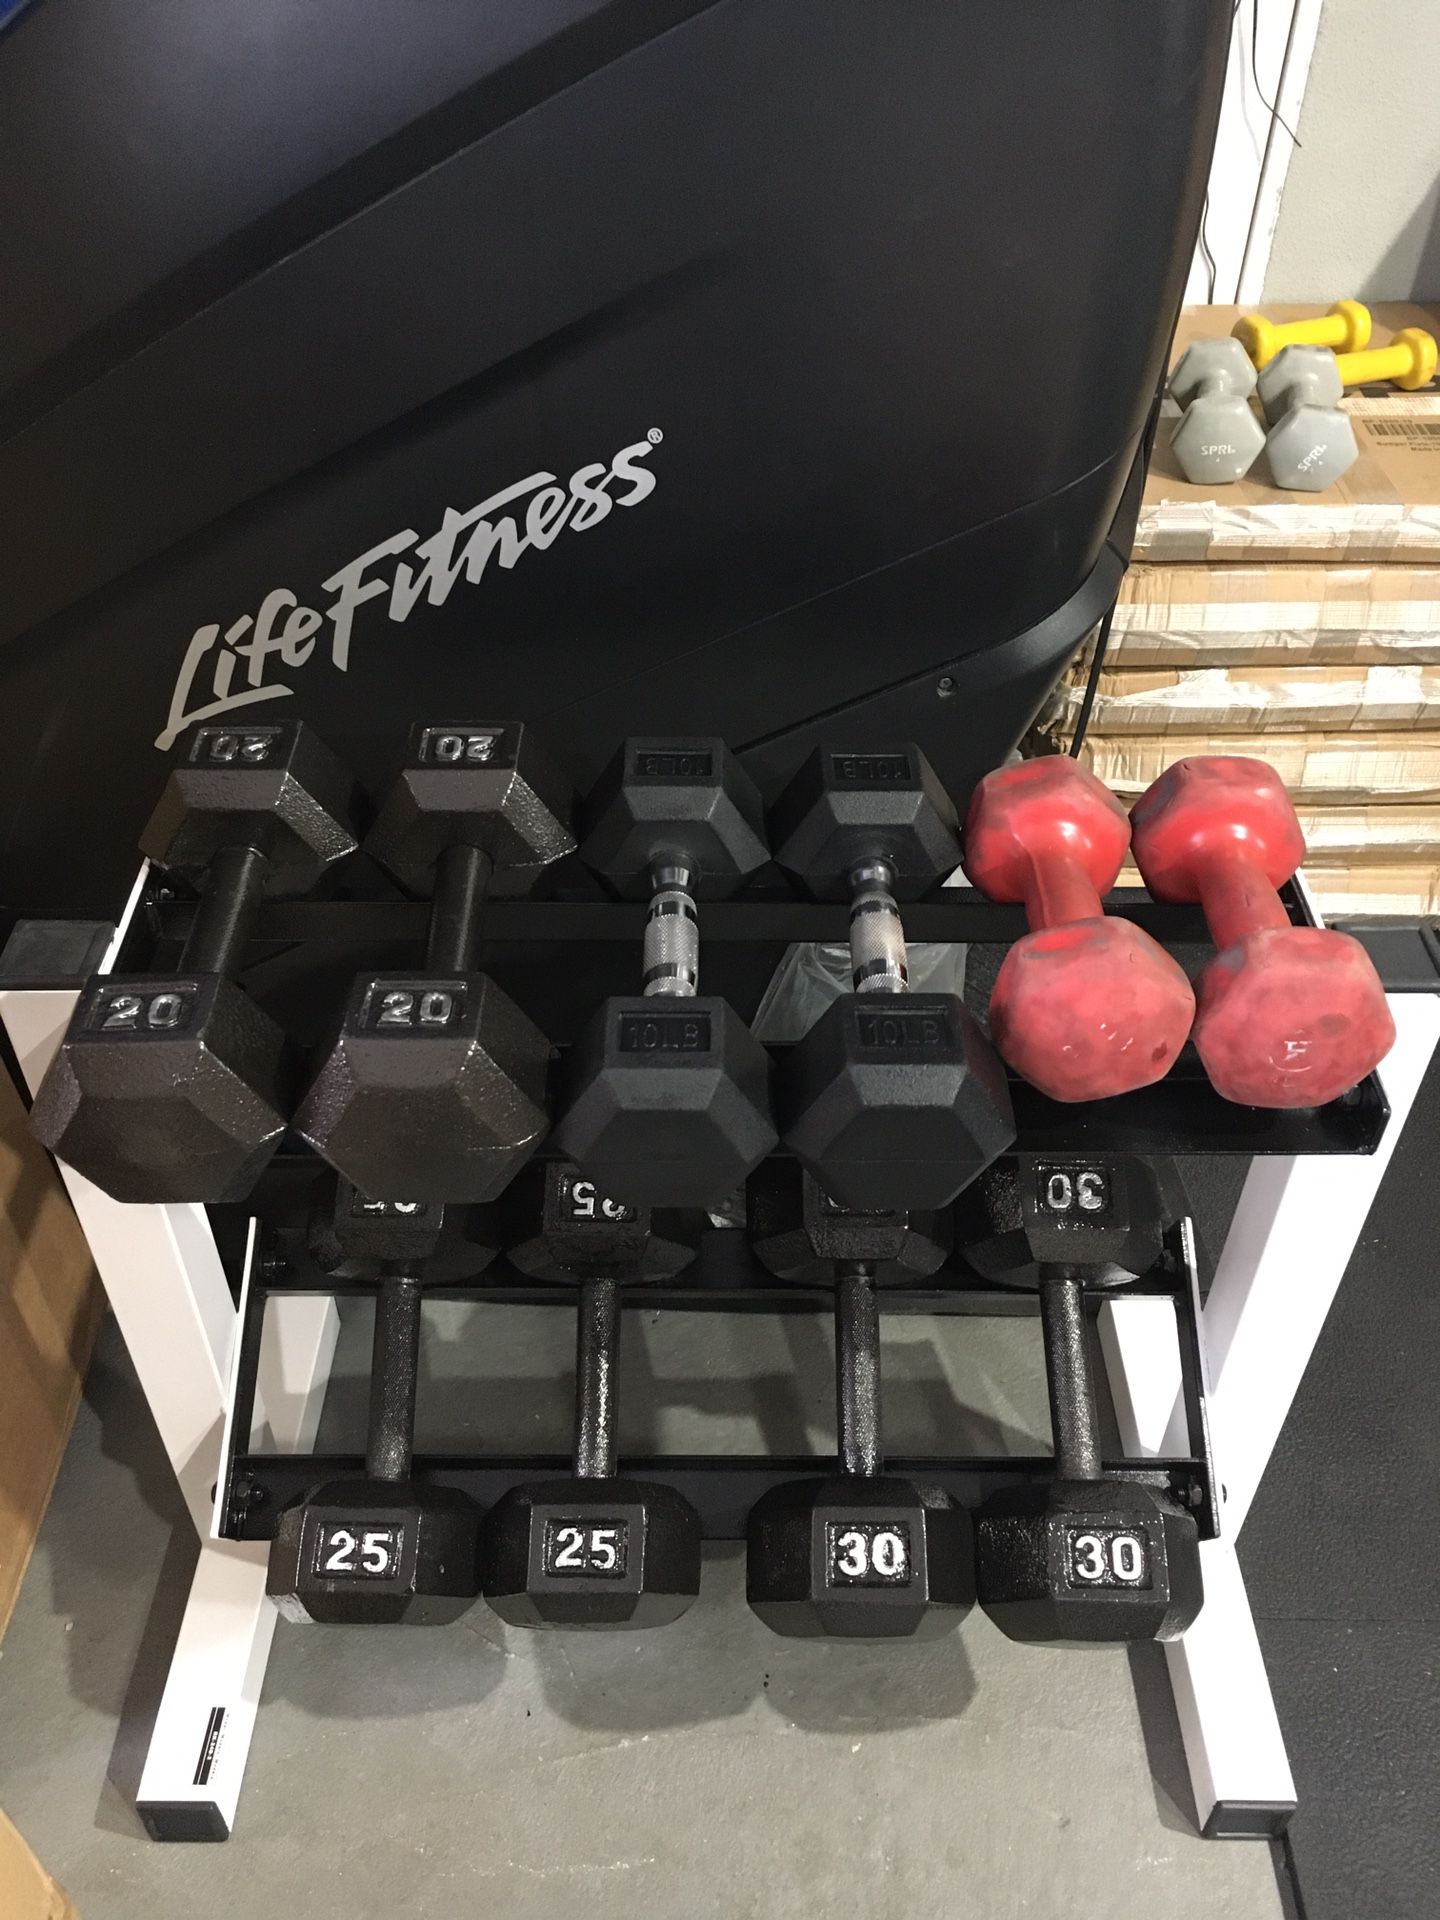 Dumbbell set brand new 8lb 10lb 20lb 25lb 30lb 8lb pair is used and everything else is brand new